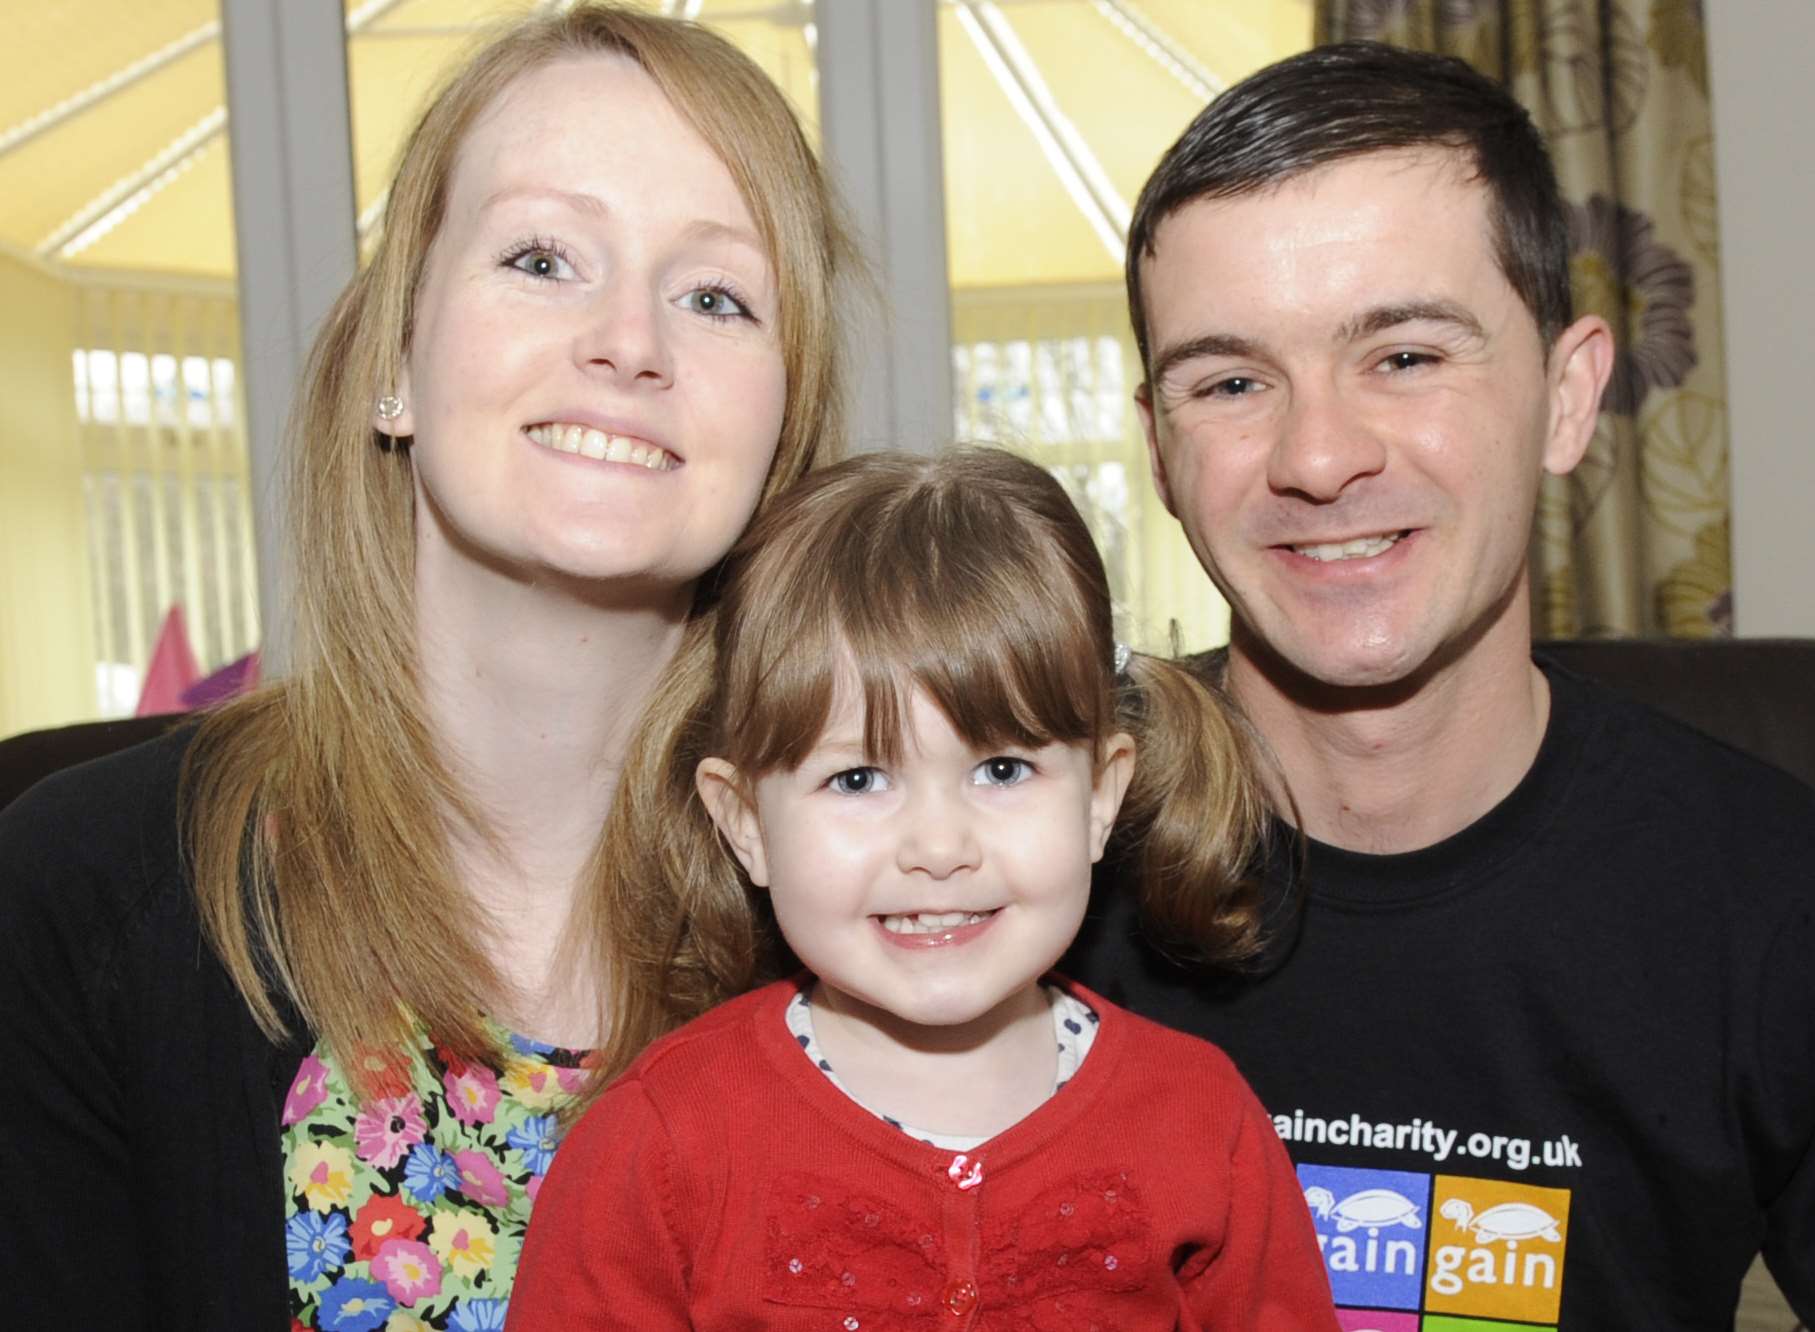 Darren Parr will be doing a charity bike ride. Sam Parr, Darren Parr and three year old Amy Parr